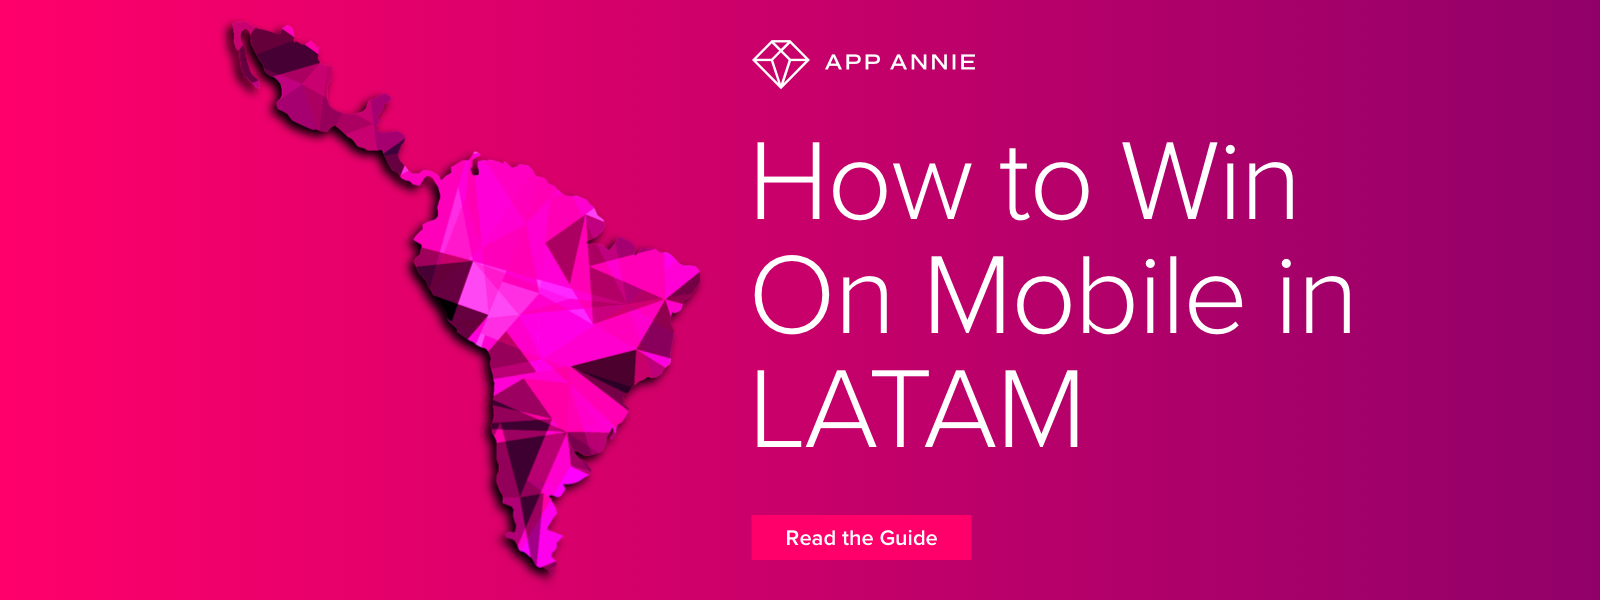 How to Win on Mobile in LATAM